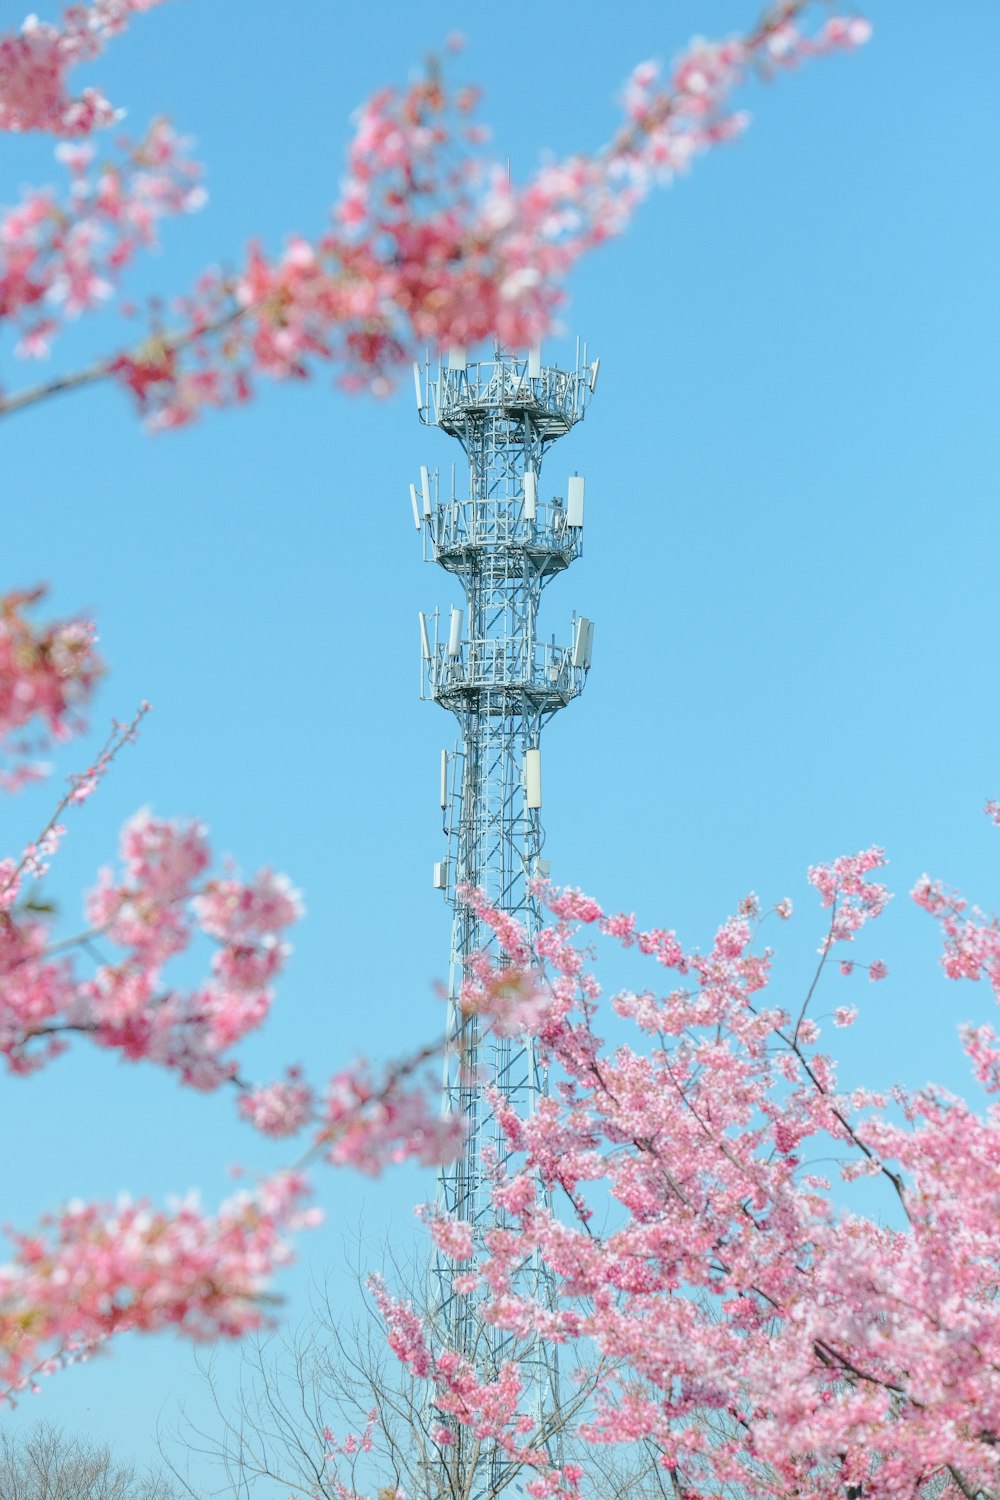 a cell phone tower surrounded by pink flowers